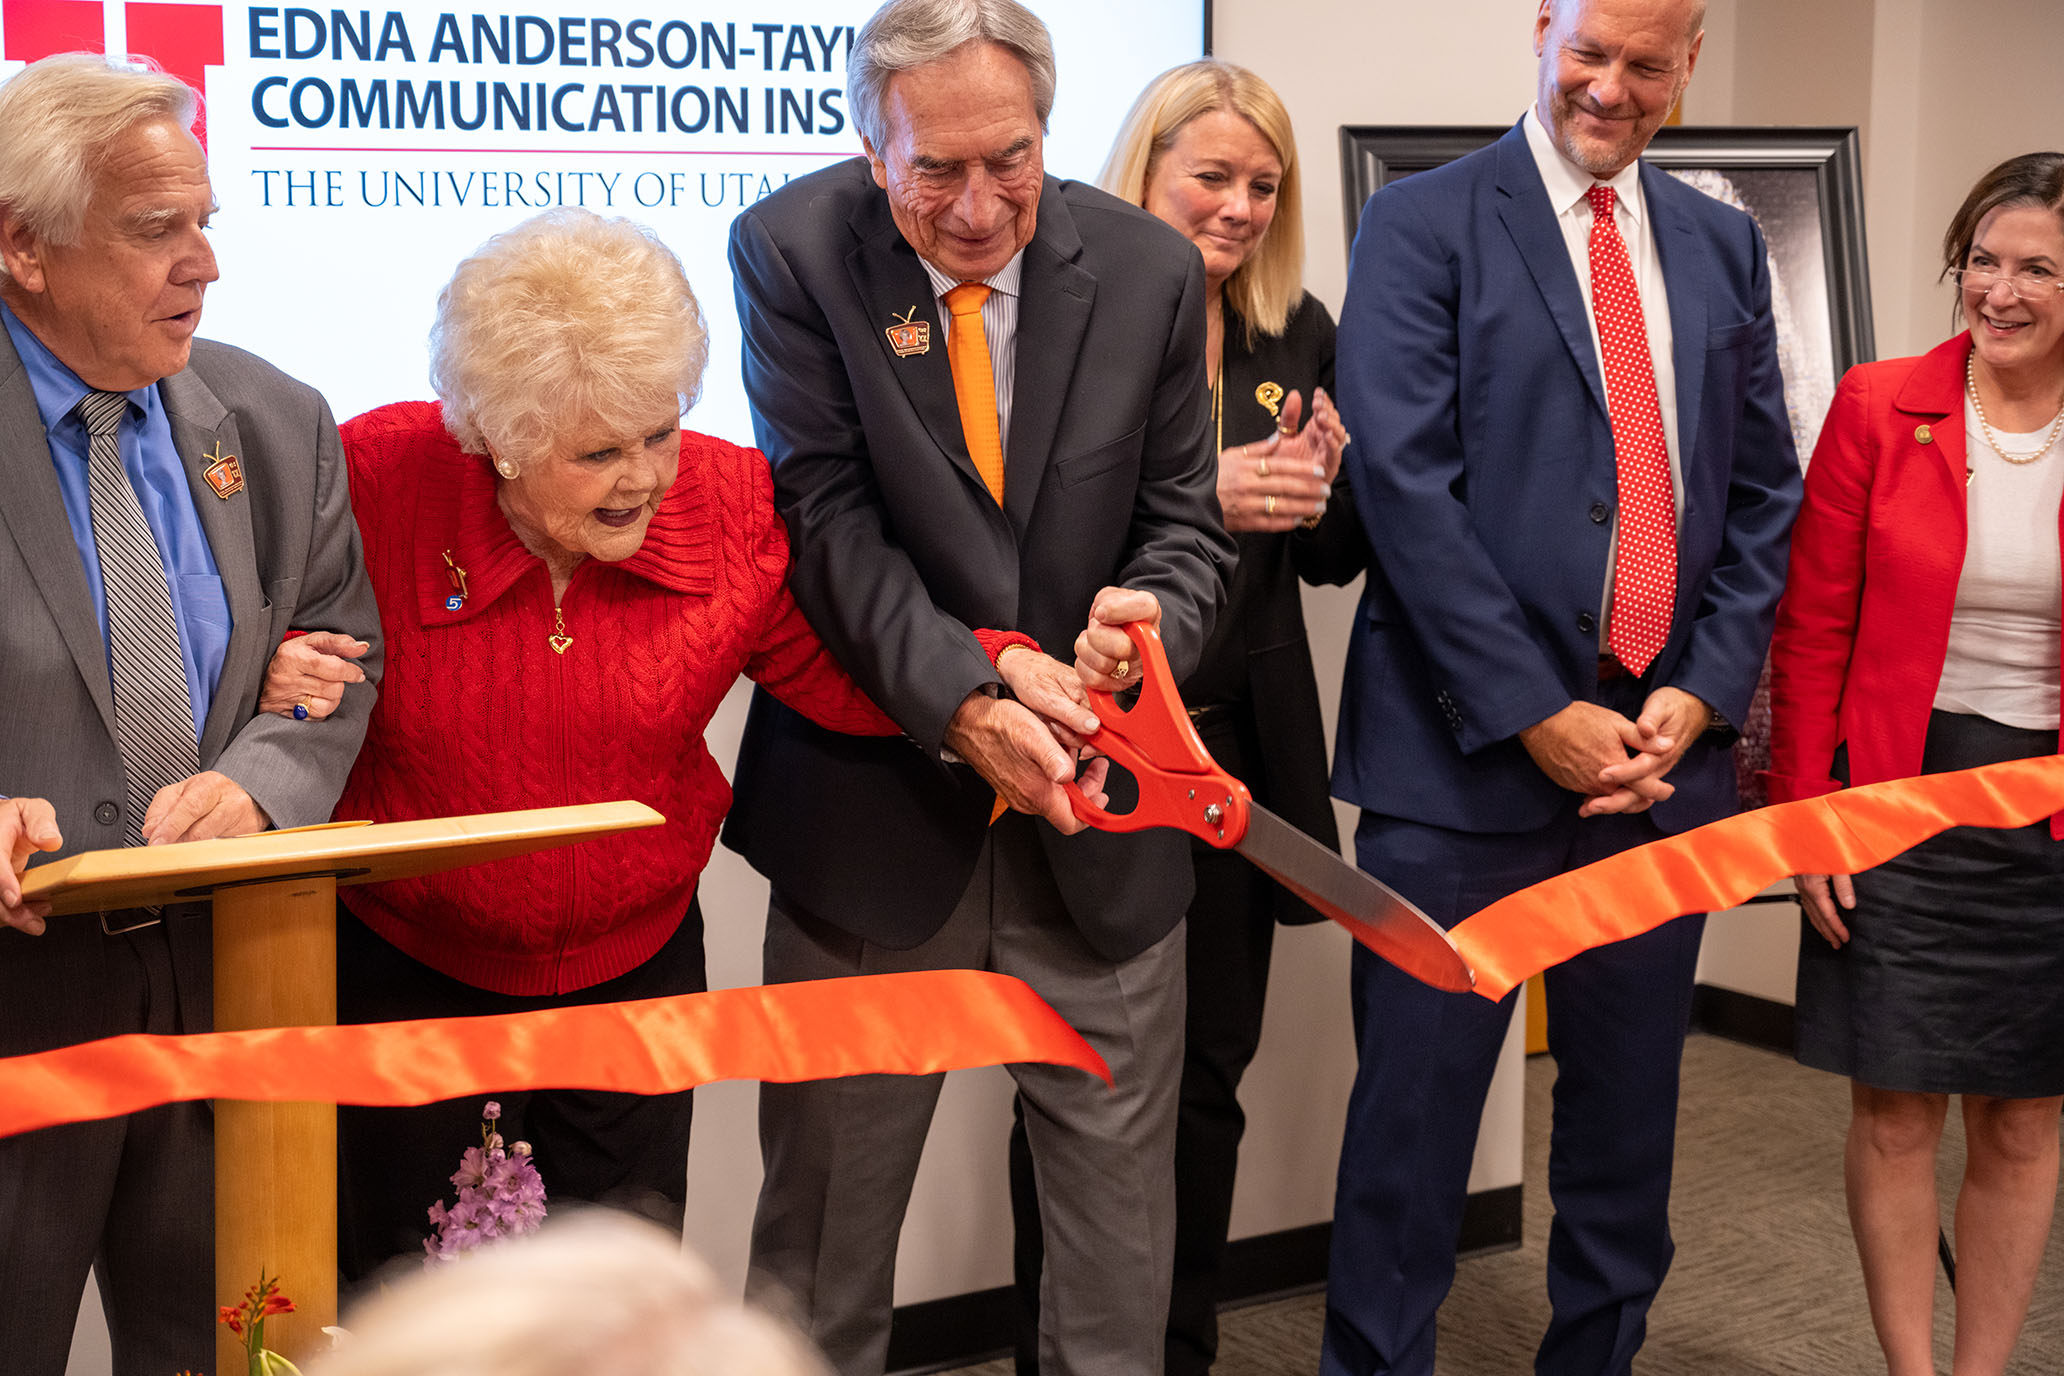 Edna Anderson-Taylor cutting the ribbon for the comm institute.